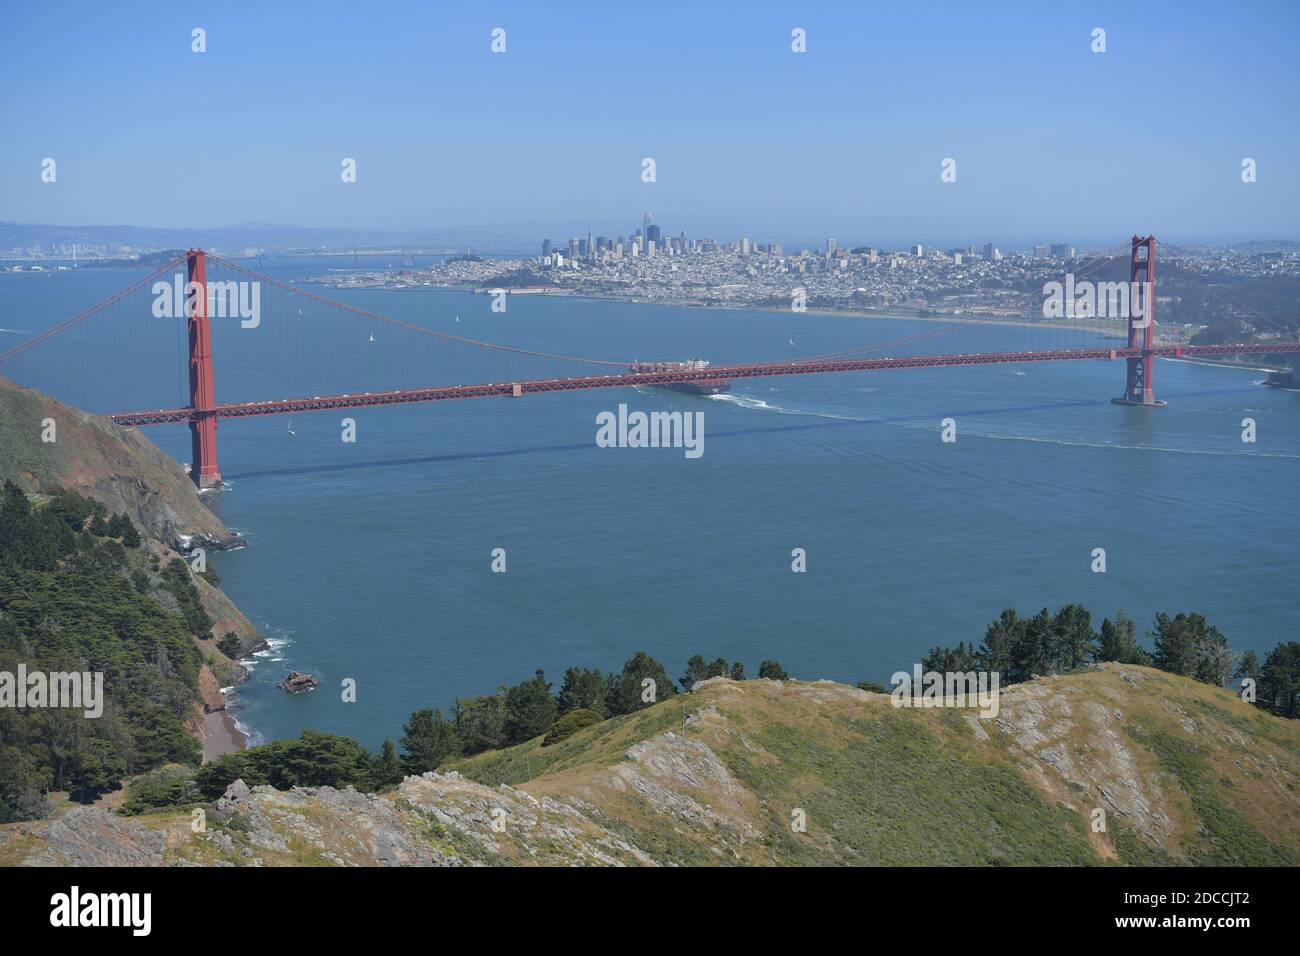 The Golden Gate Bridge is a suspension bridge spanning the Golden Gate, the one-mile-wide strait connecting San Francisco Bay and the Pacific Ocean. Stock Photo